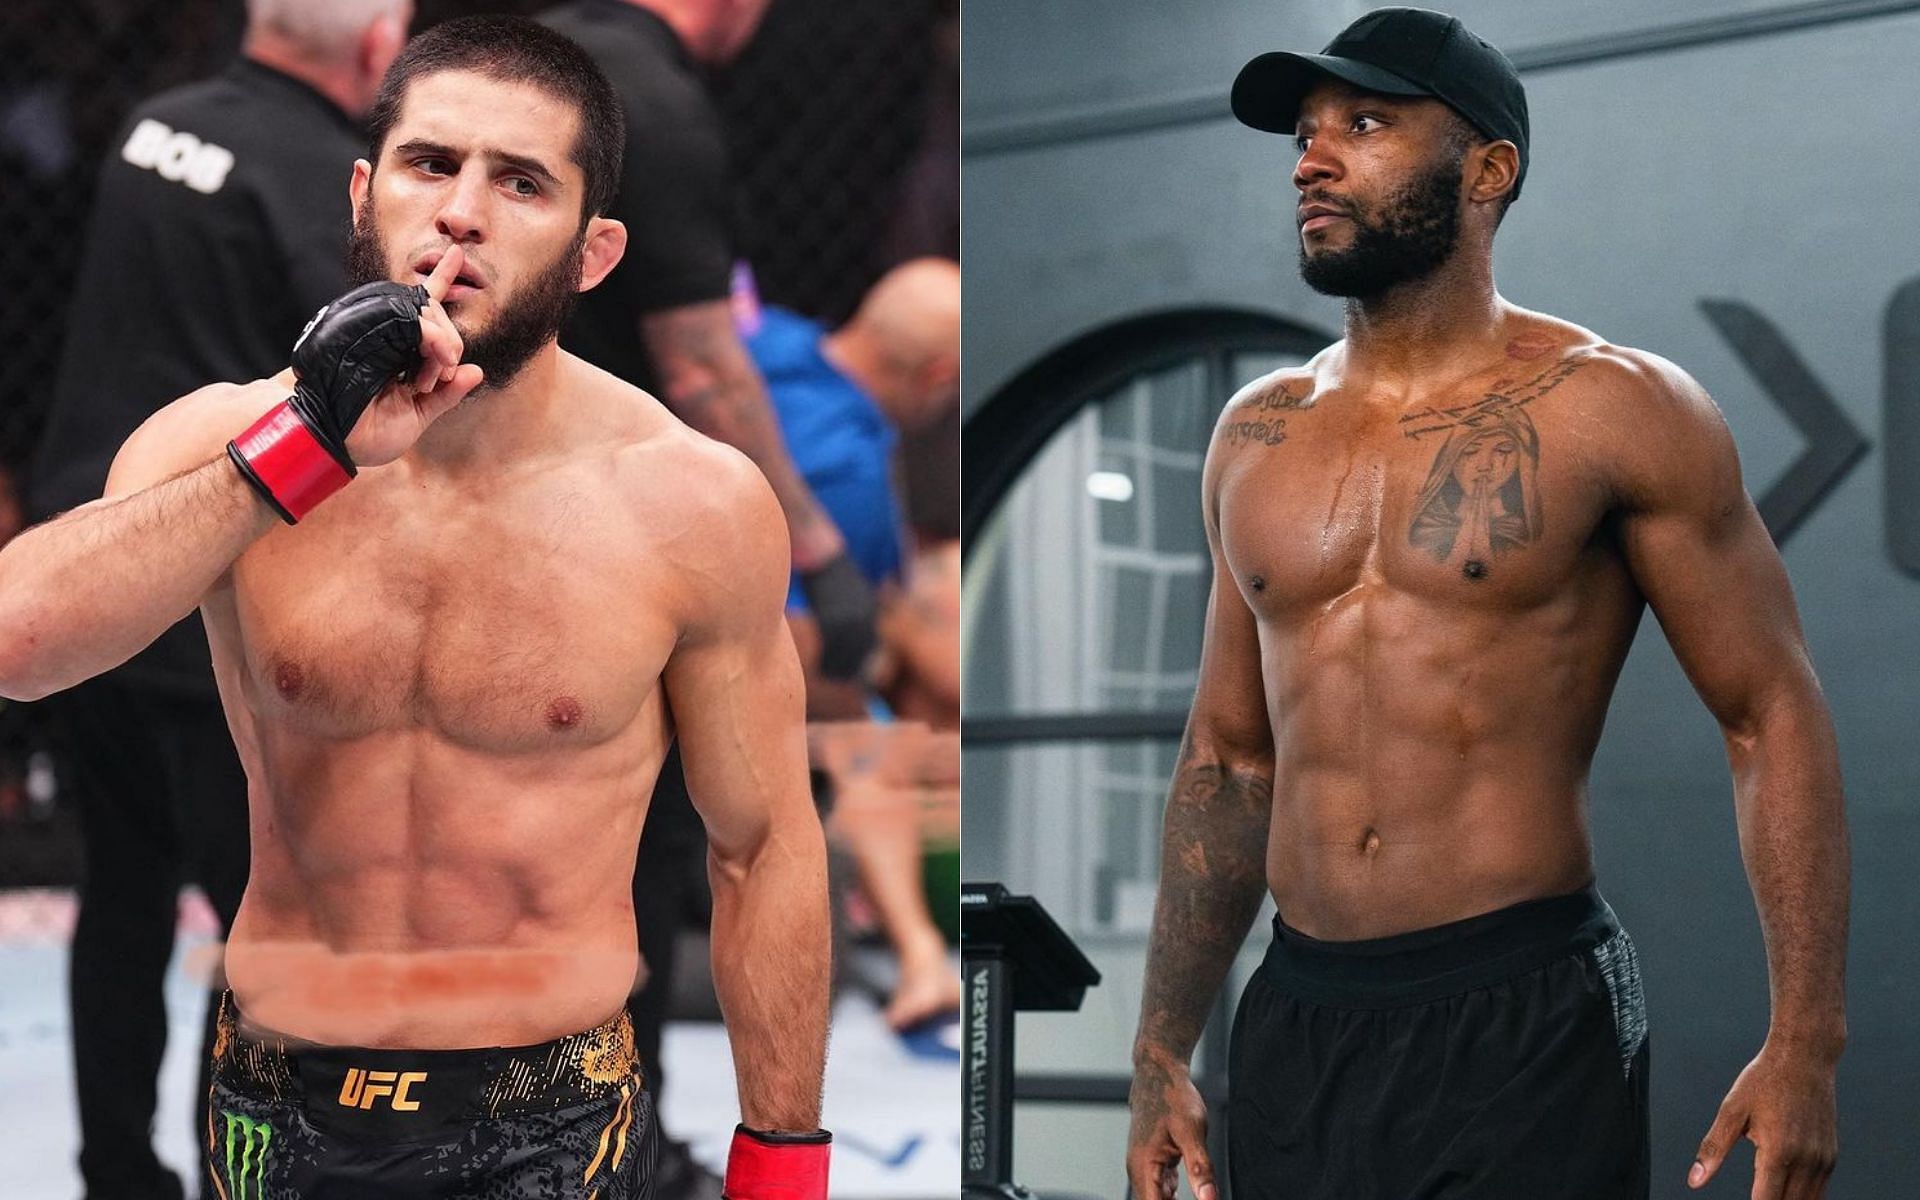 Islam Makhachev (left) has expressed interest in fighting Leon Edwards (right) [Image credits: @islam_makhachev and @leonedwardsmma on Instagram]